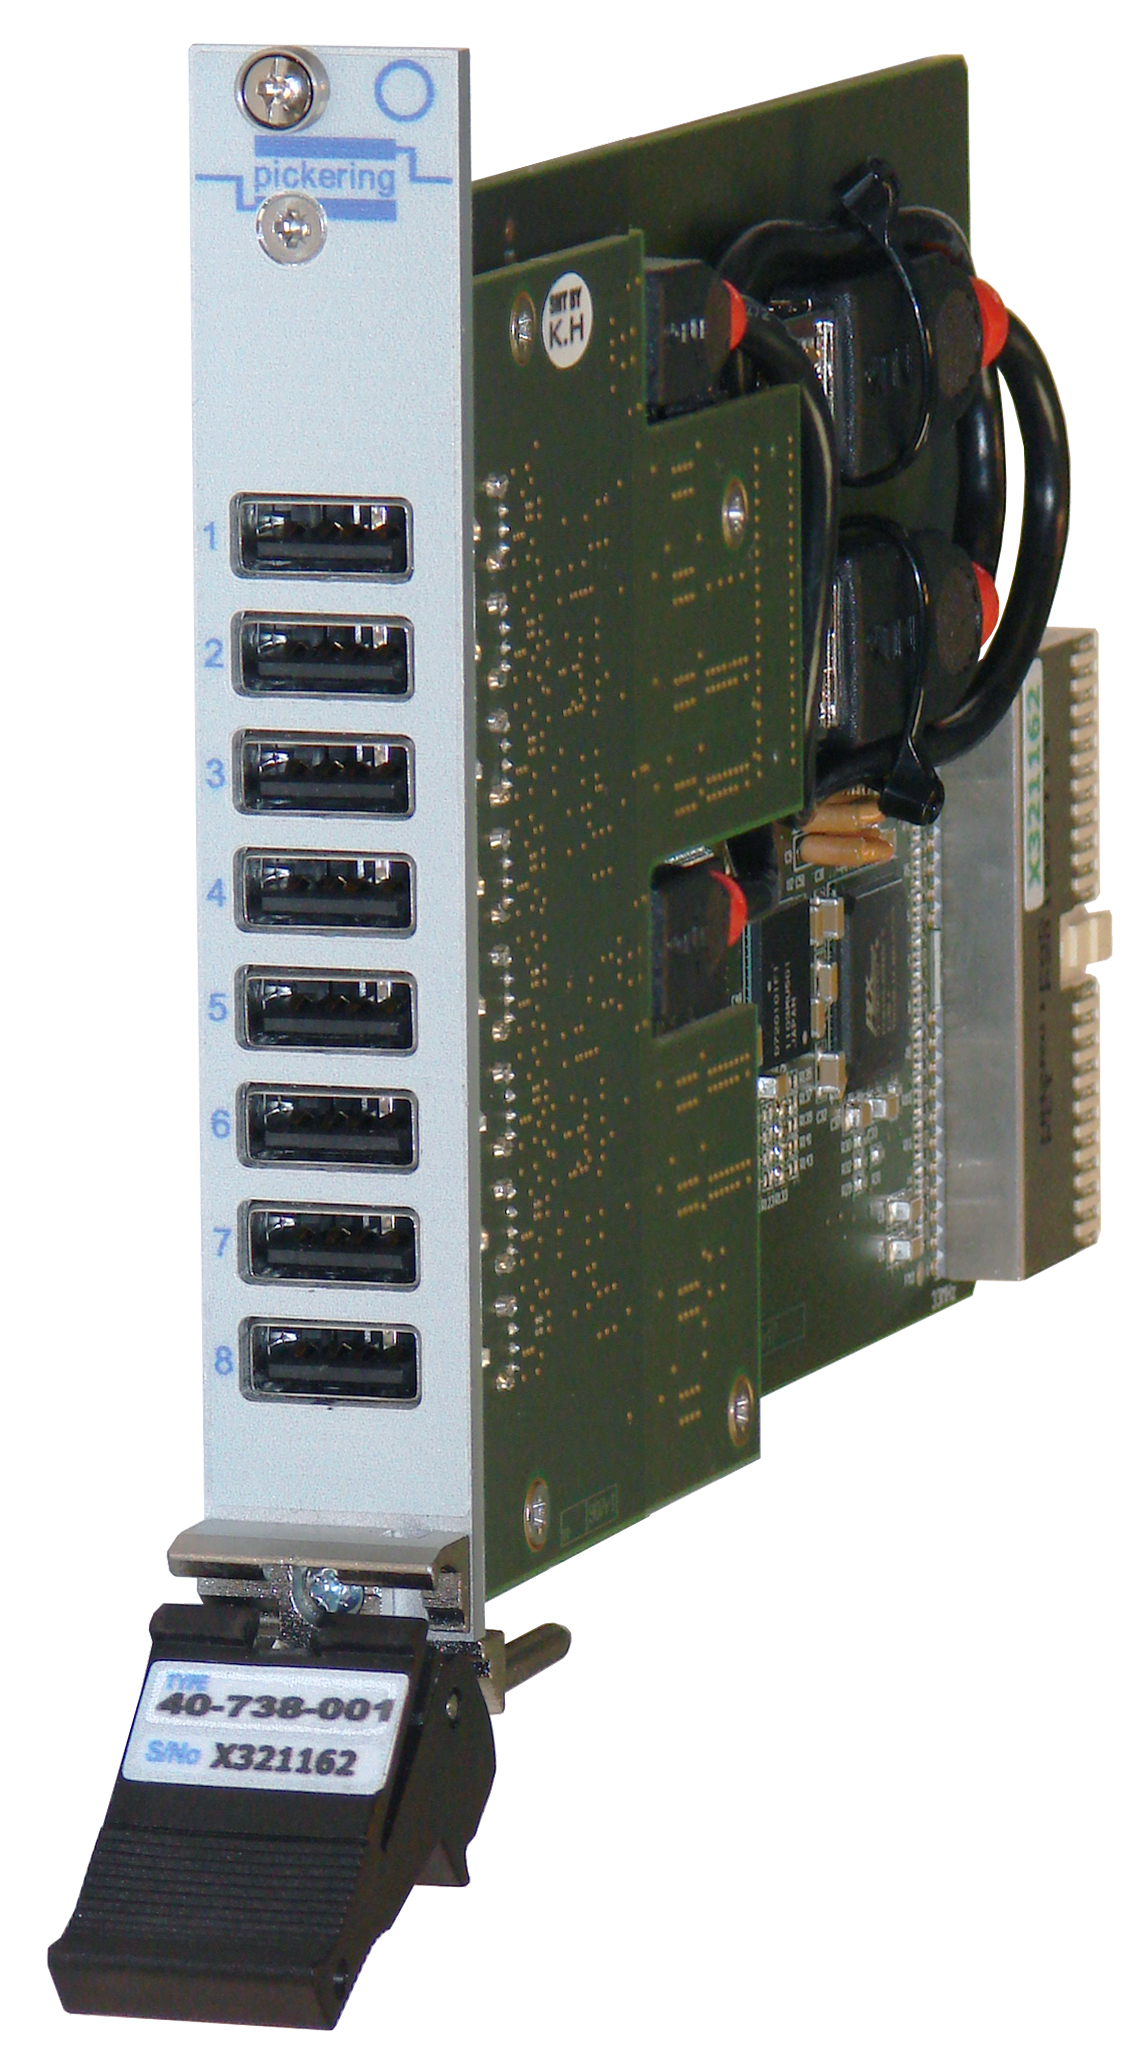 Front panel of 40-738